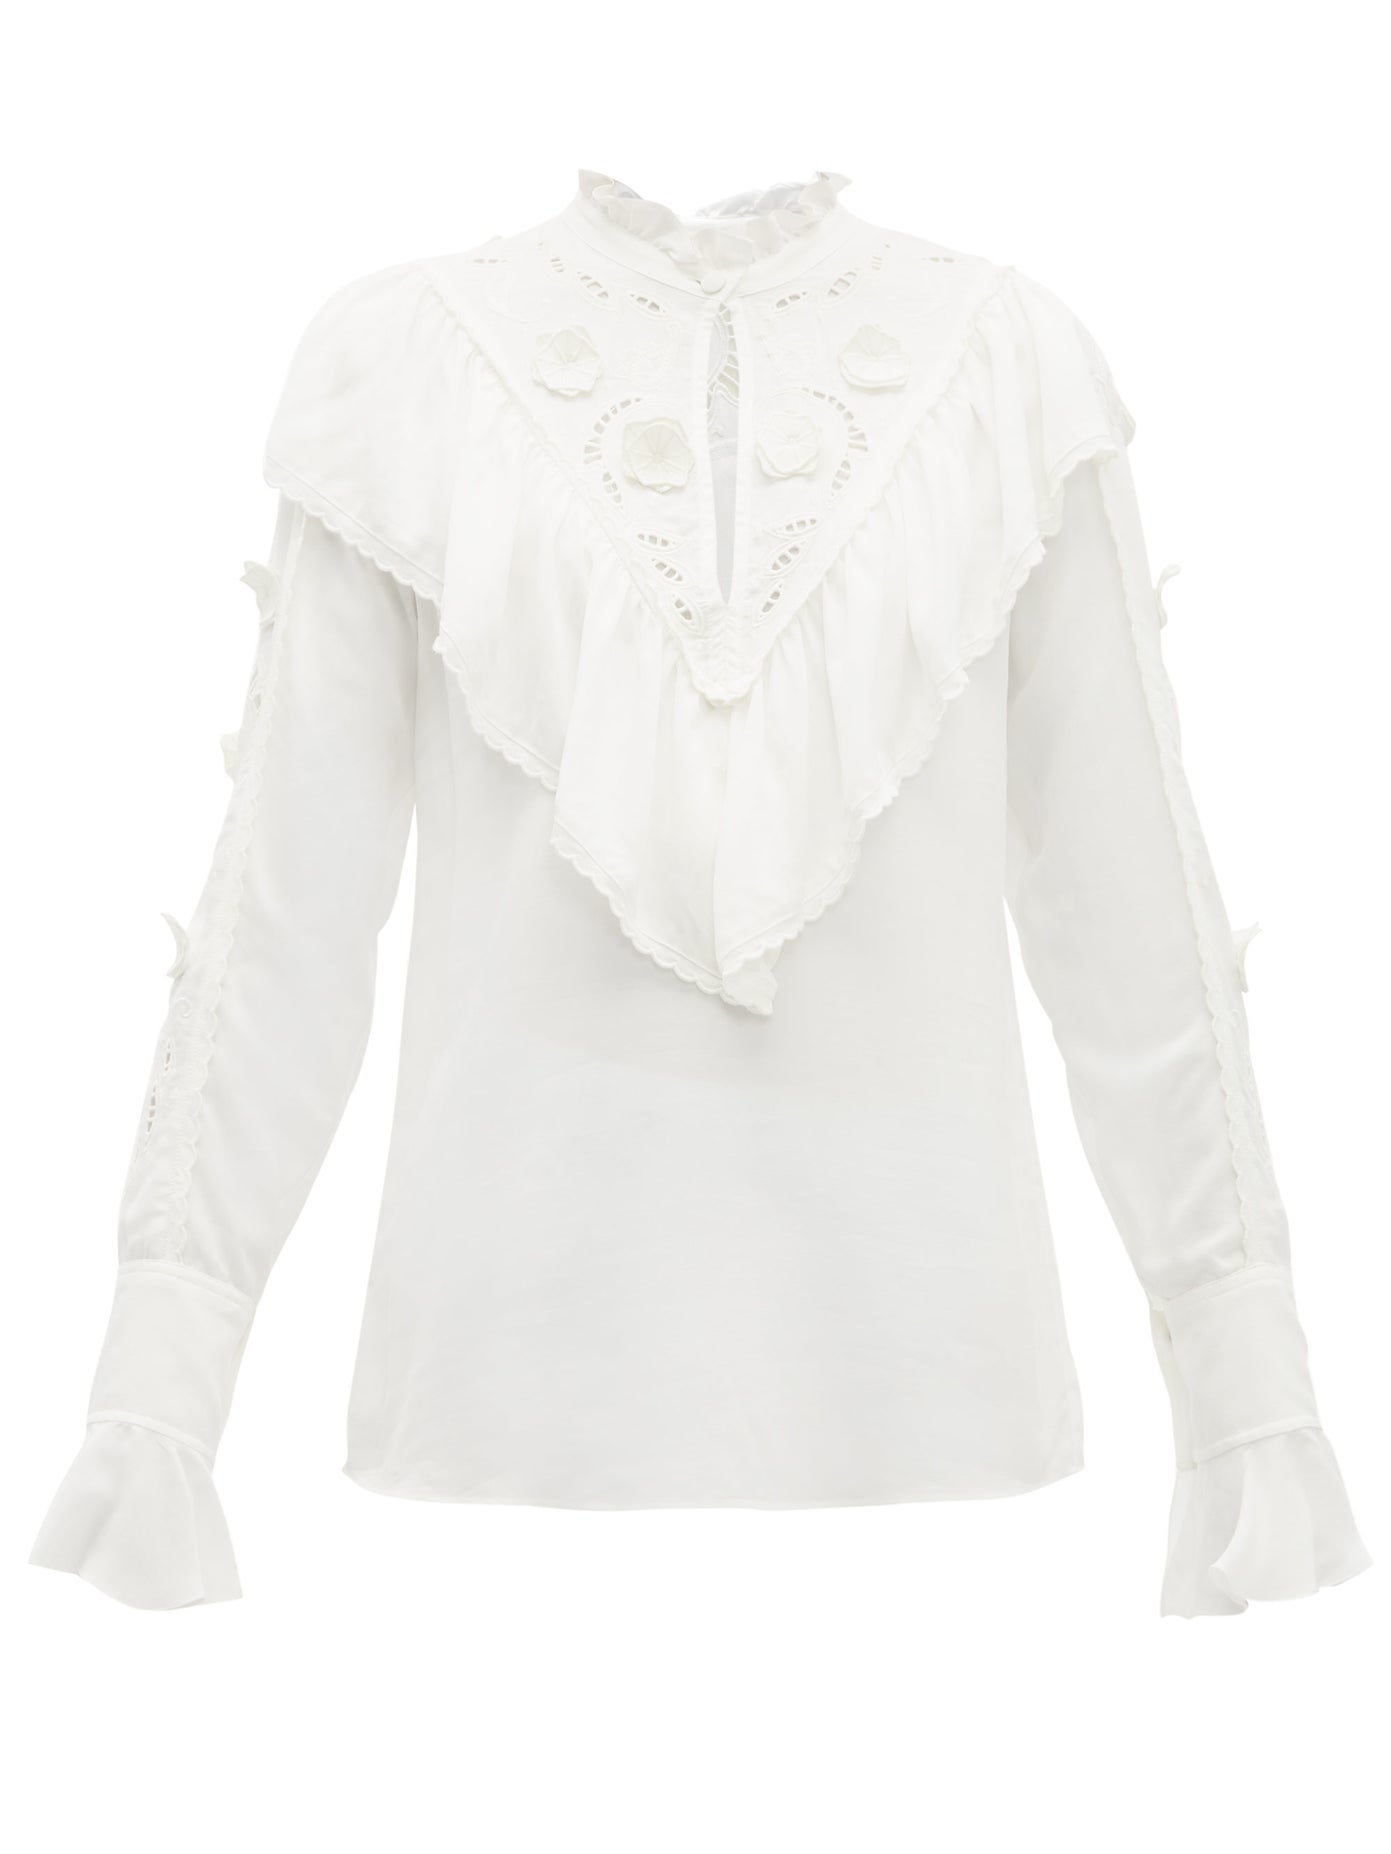 See by Chloé Floral Embroidered Ruffled Blouse in White — UFO No More